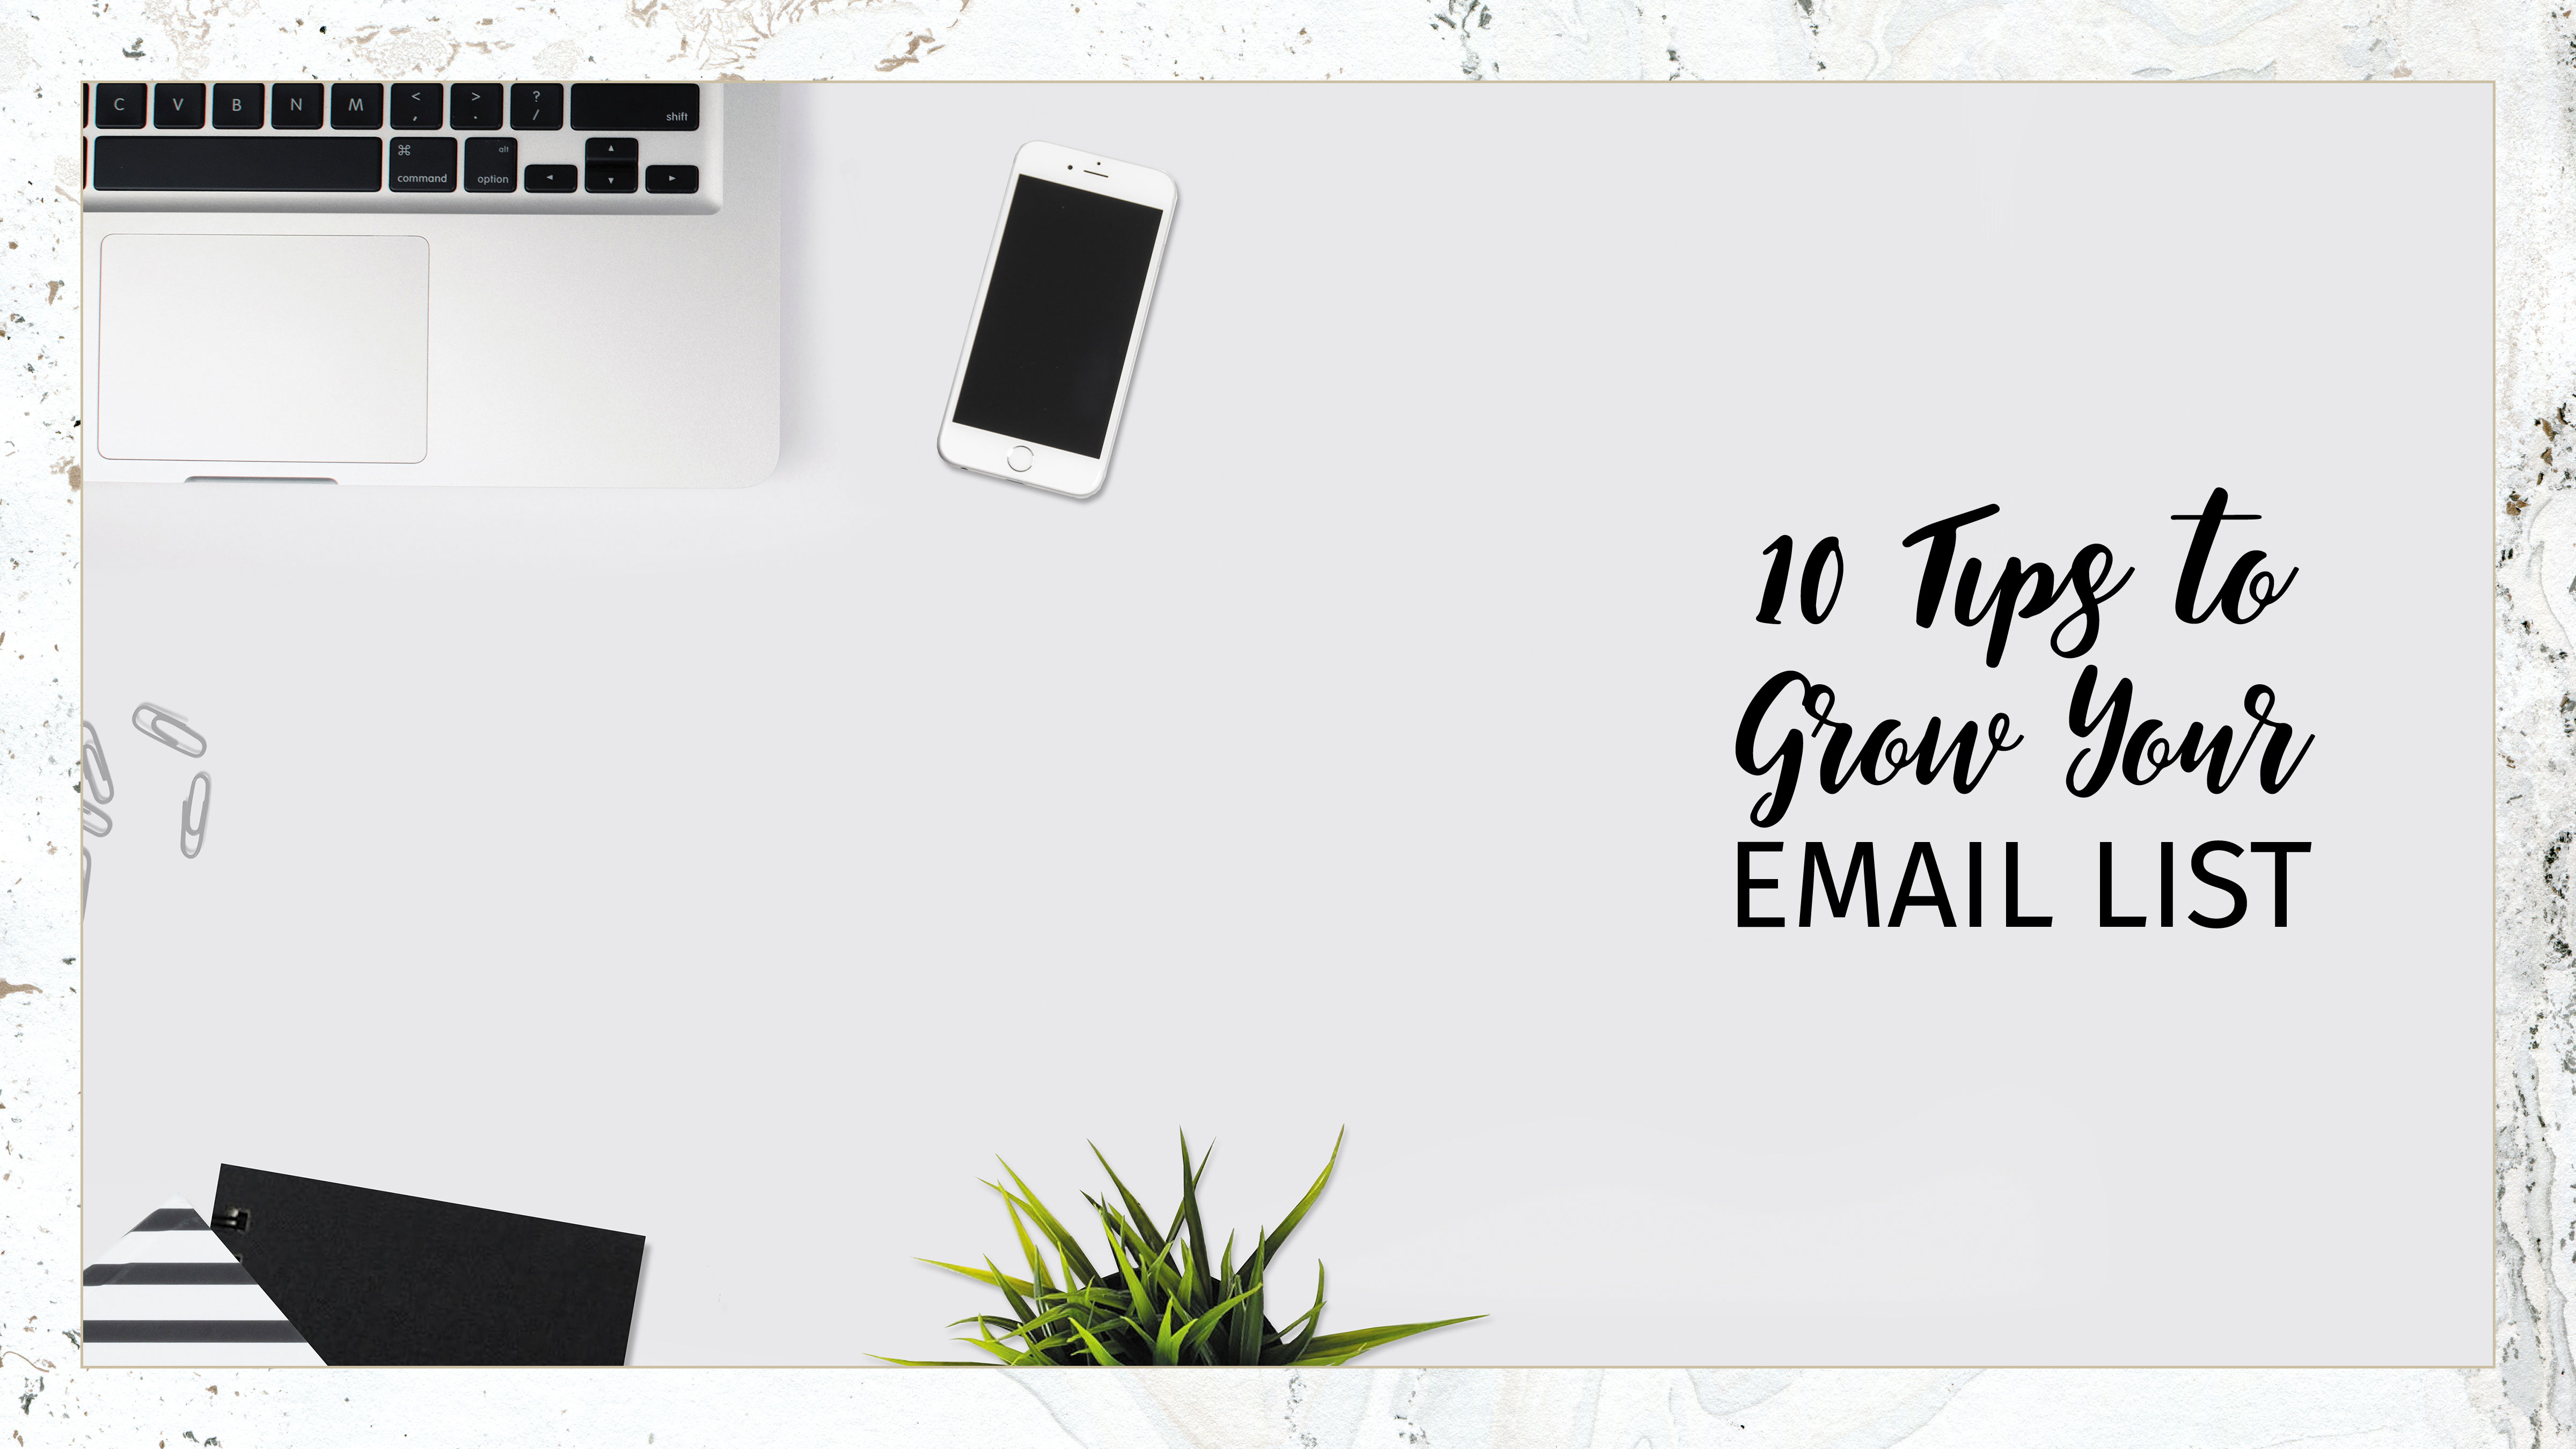 Plant, phone and computer on a white desktop with text - 10 Tips to Grow Your Email List